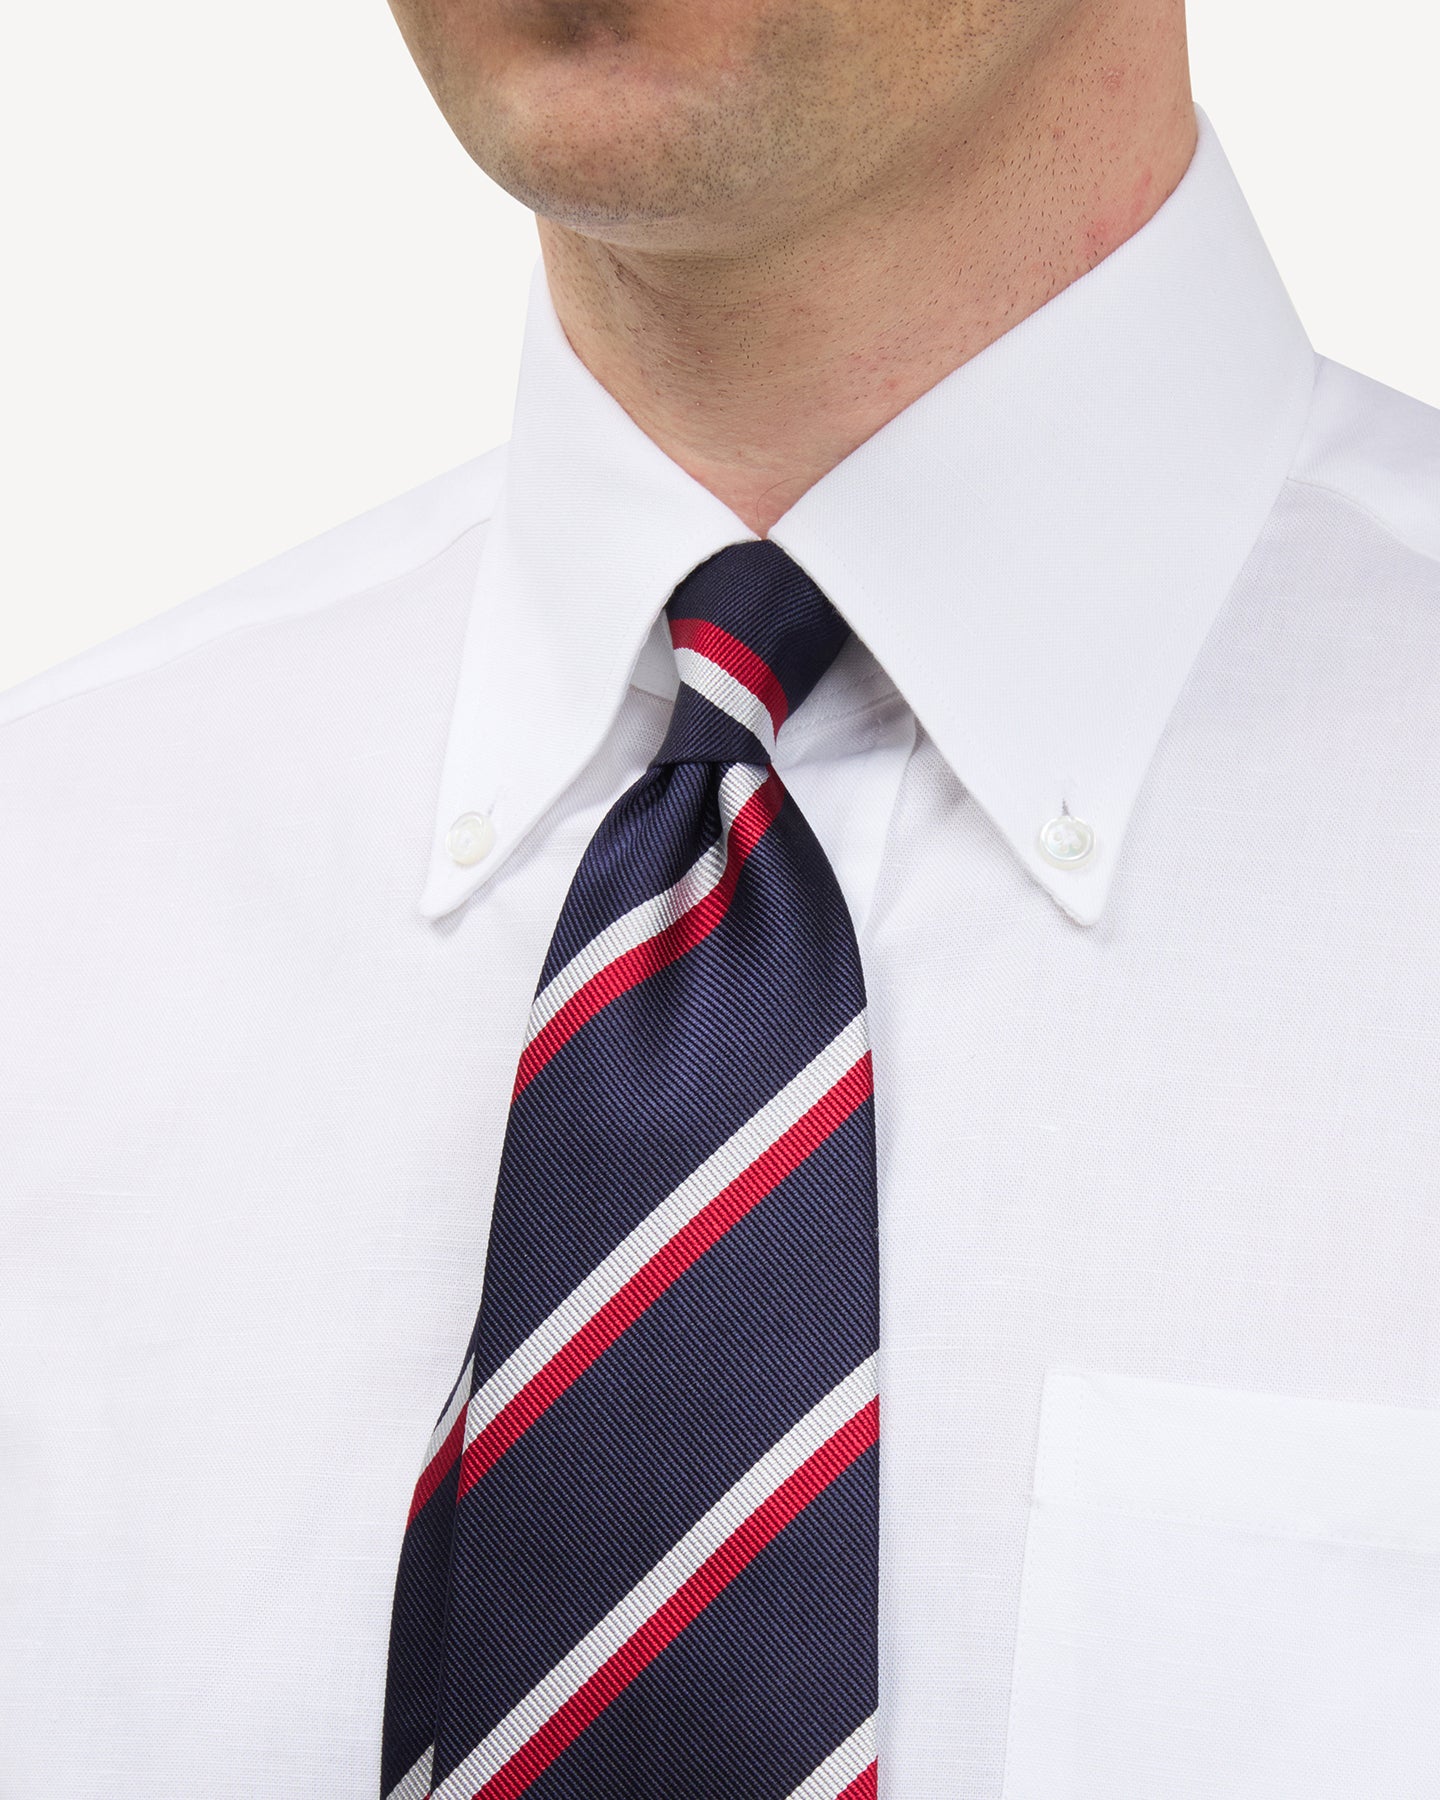 Man wearing a white button down shirt and a navy, red and white regimental stripe repp tie